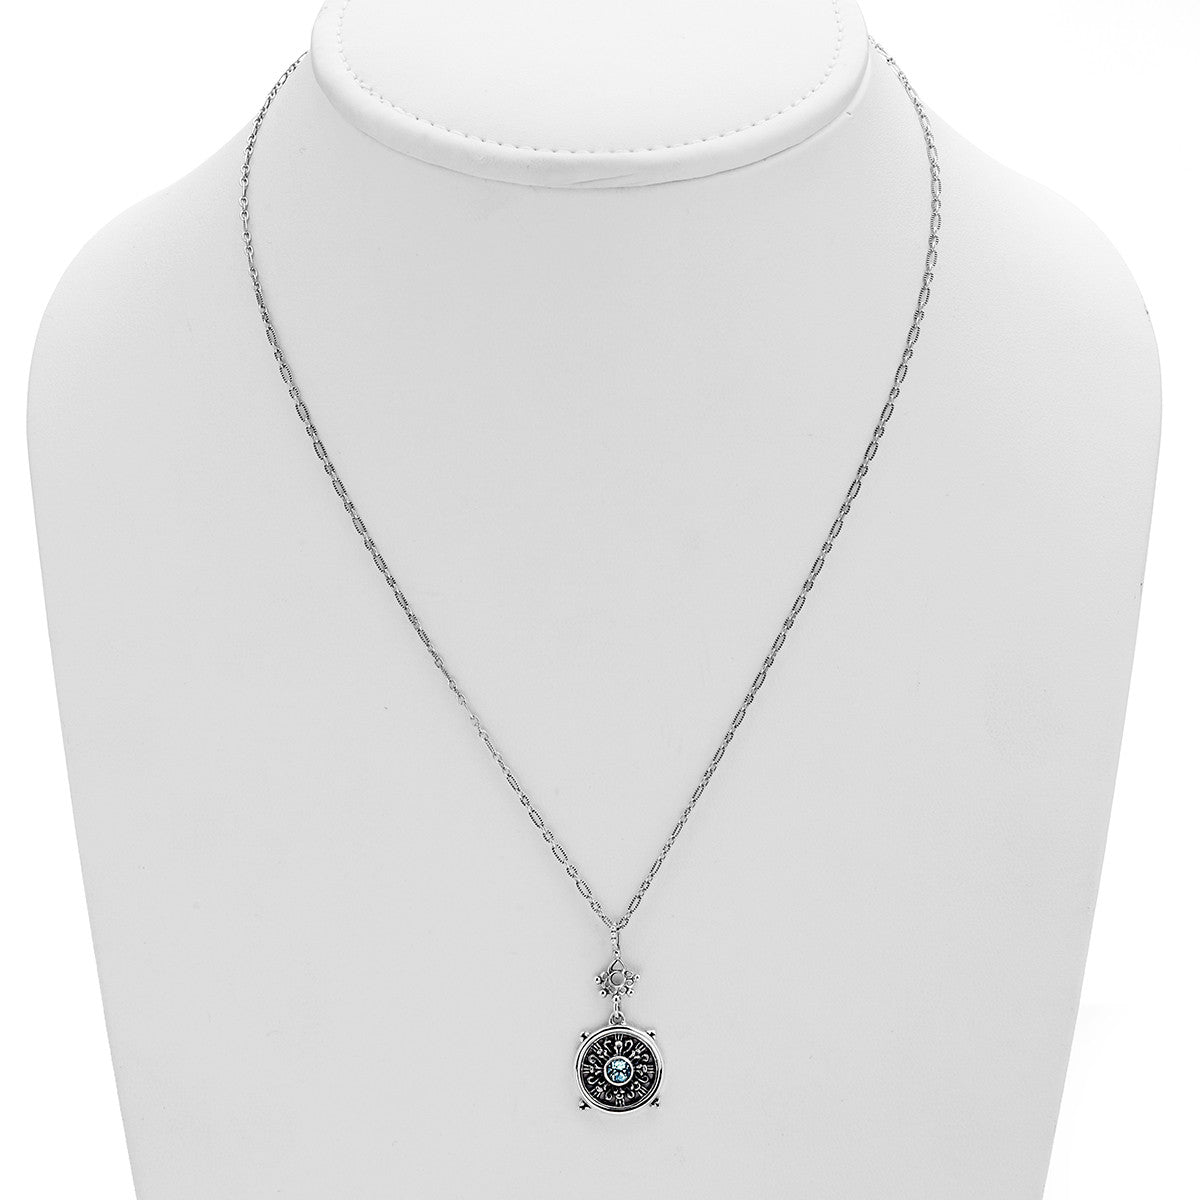 Dharmachakra Sterling Silver Blue Topaz Grace Necklace - Cynthia Gale New York